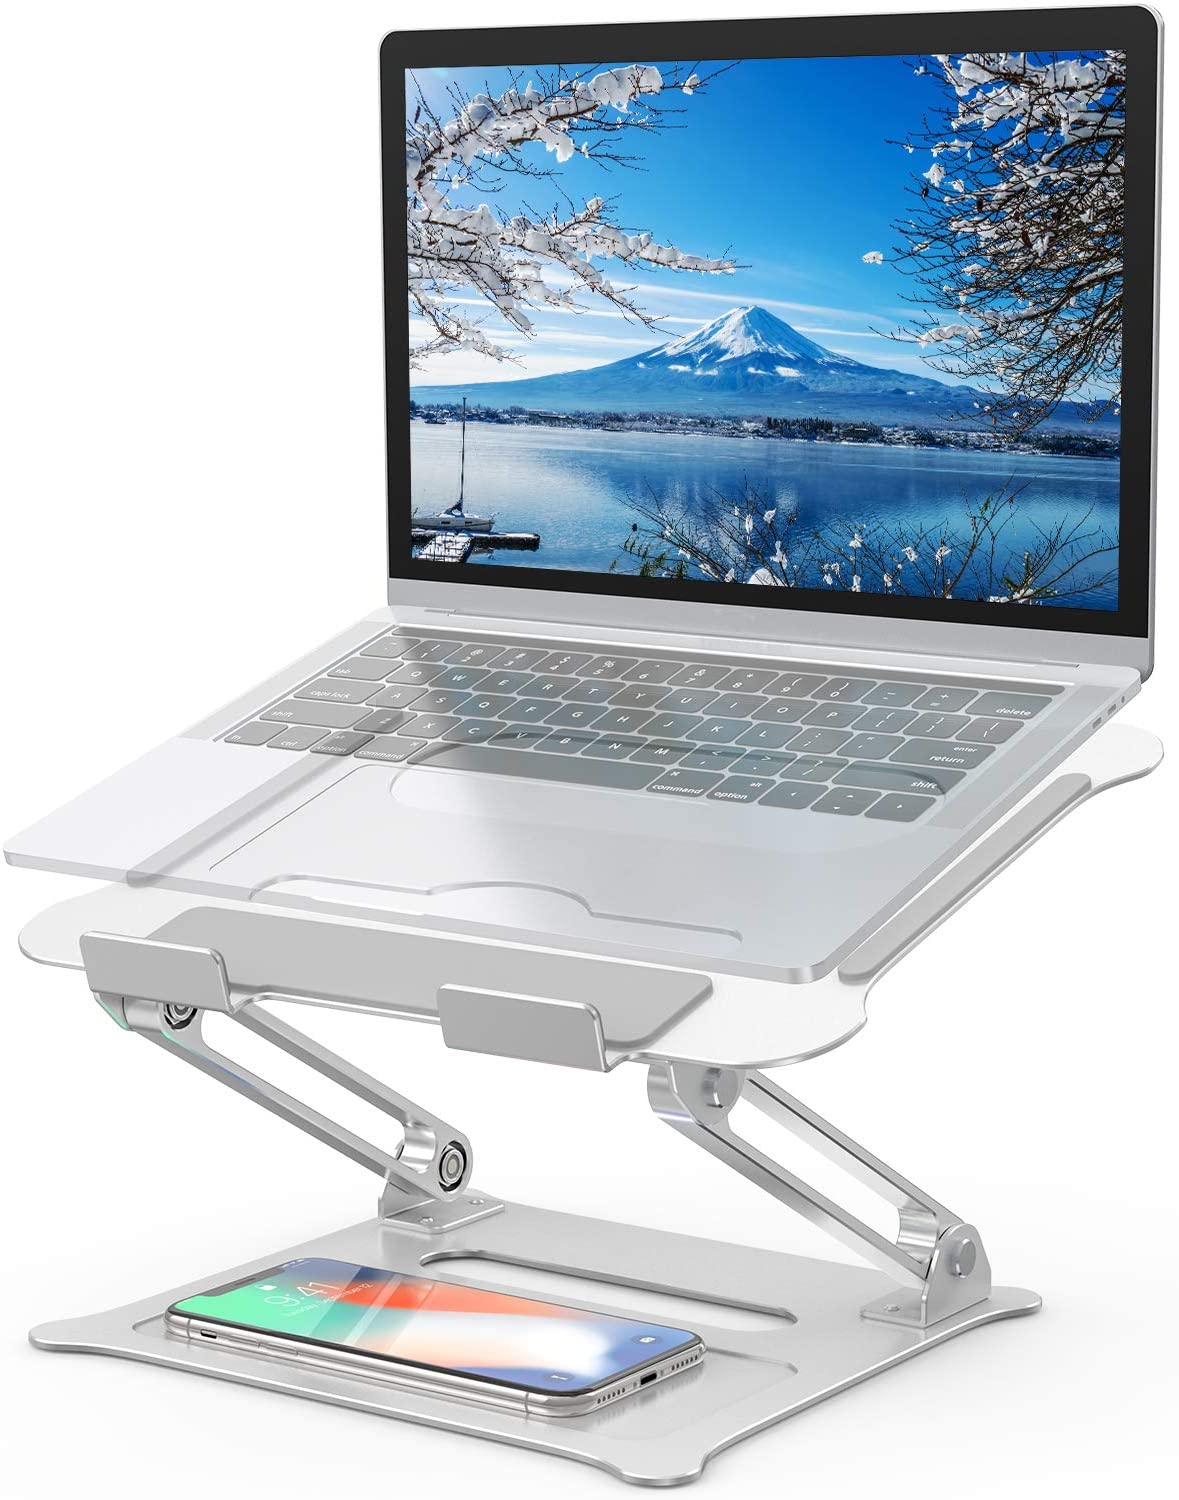 Duchy adjustable stand with heat vent for MacBook Cyber Monday Deal